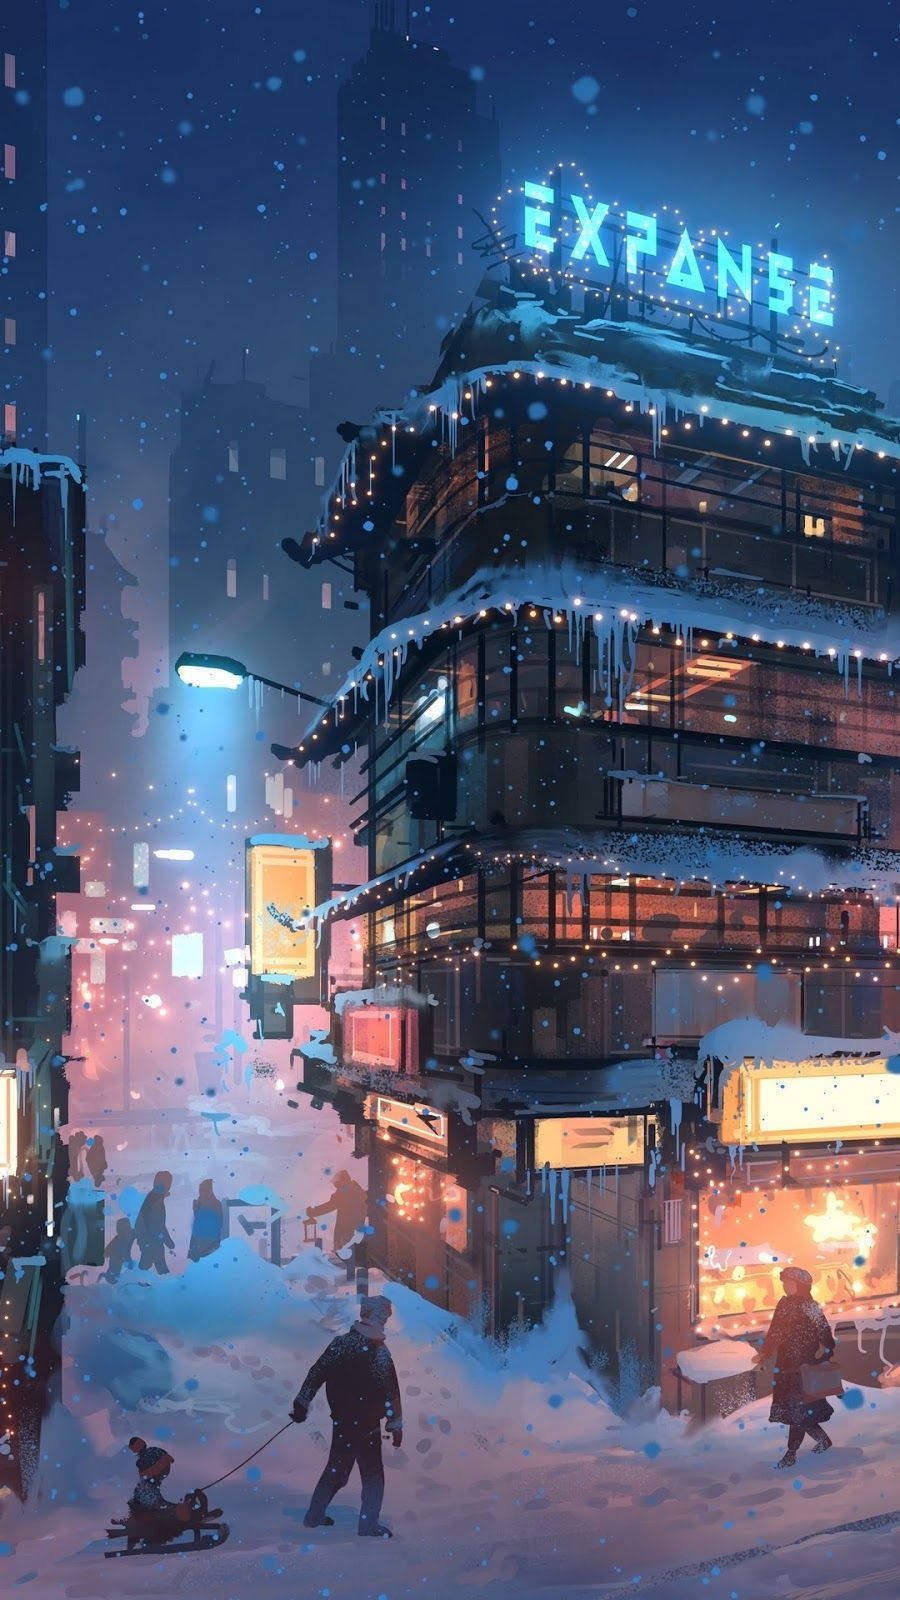 Aesthetic Anime Expanse Building In Winter Phone Wallpaper